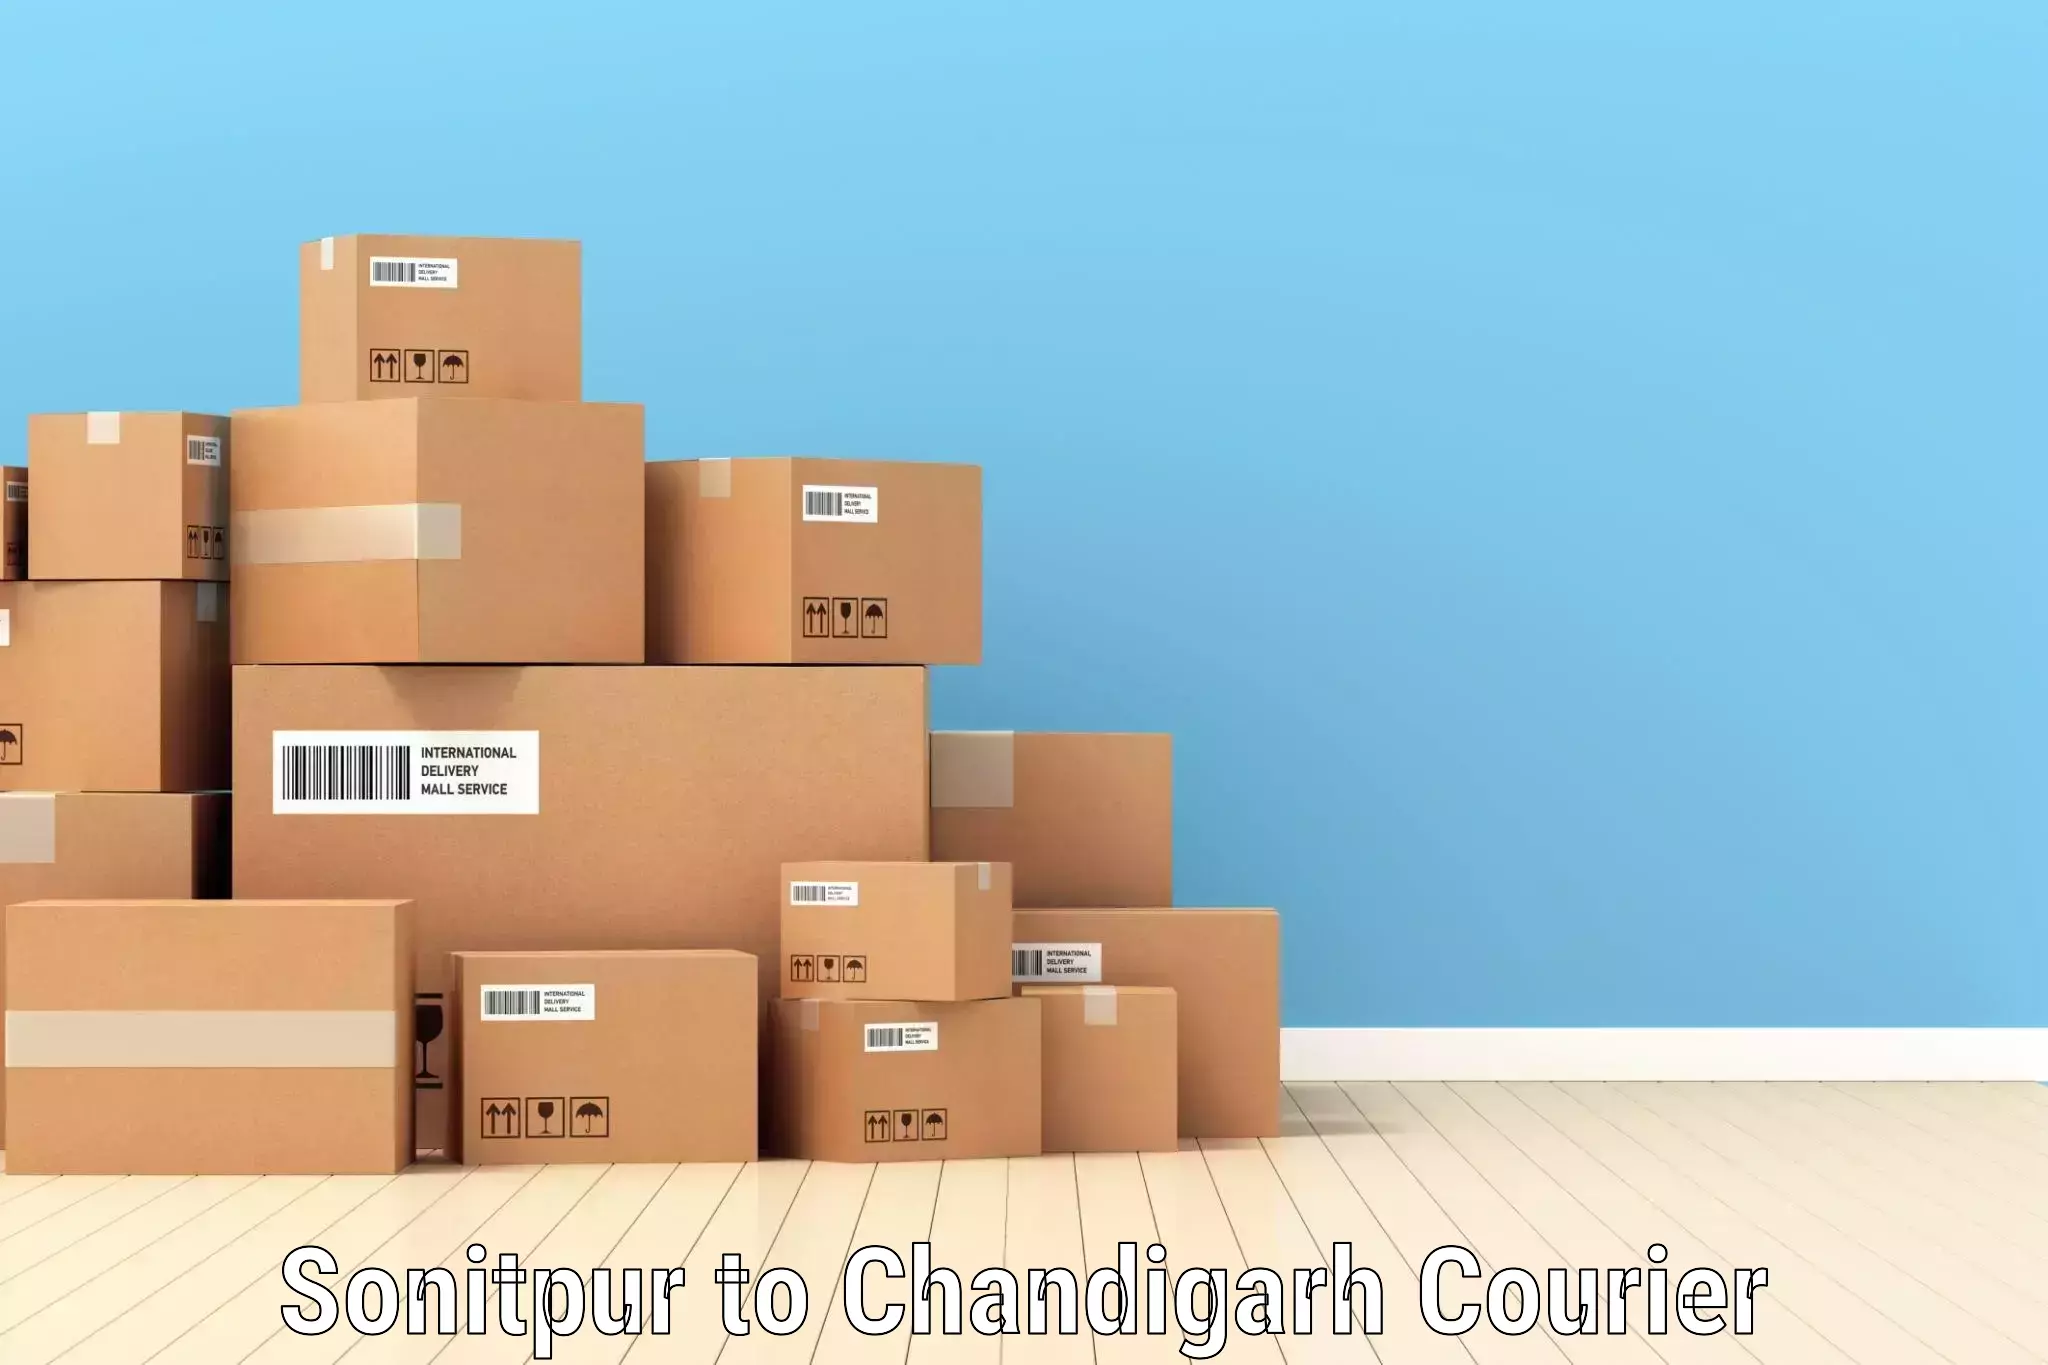 Enhanced shipping experience in Sonitpur to Chandigarh